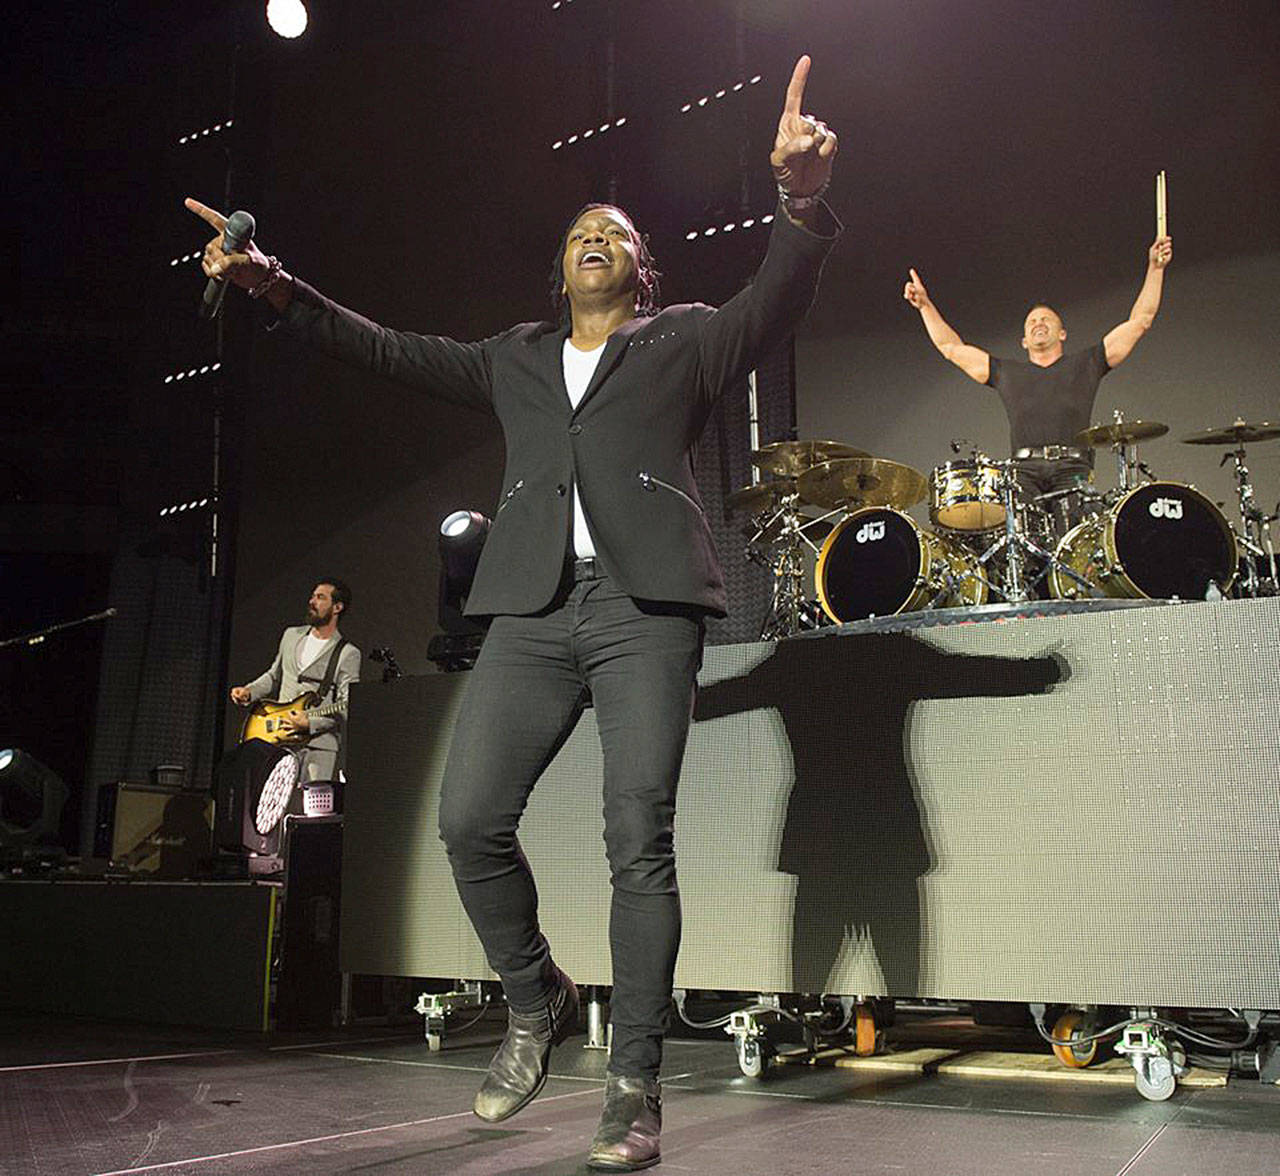 The Christian rock bands Newsboys will perform Nov. 16 at the accesso ShoWare Center. COURTESY PHOTO, Newsboys